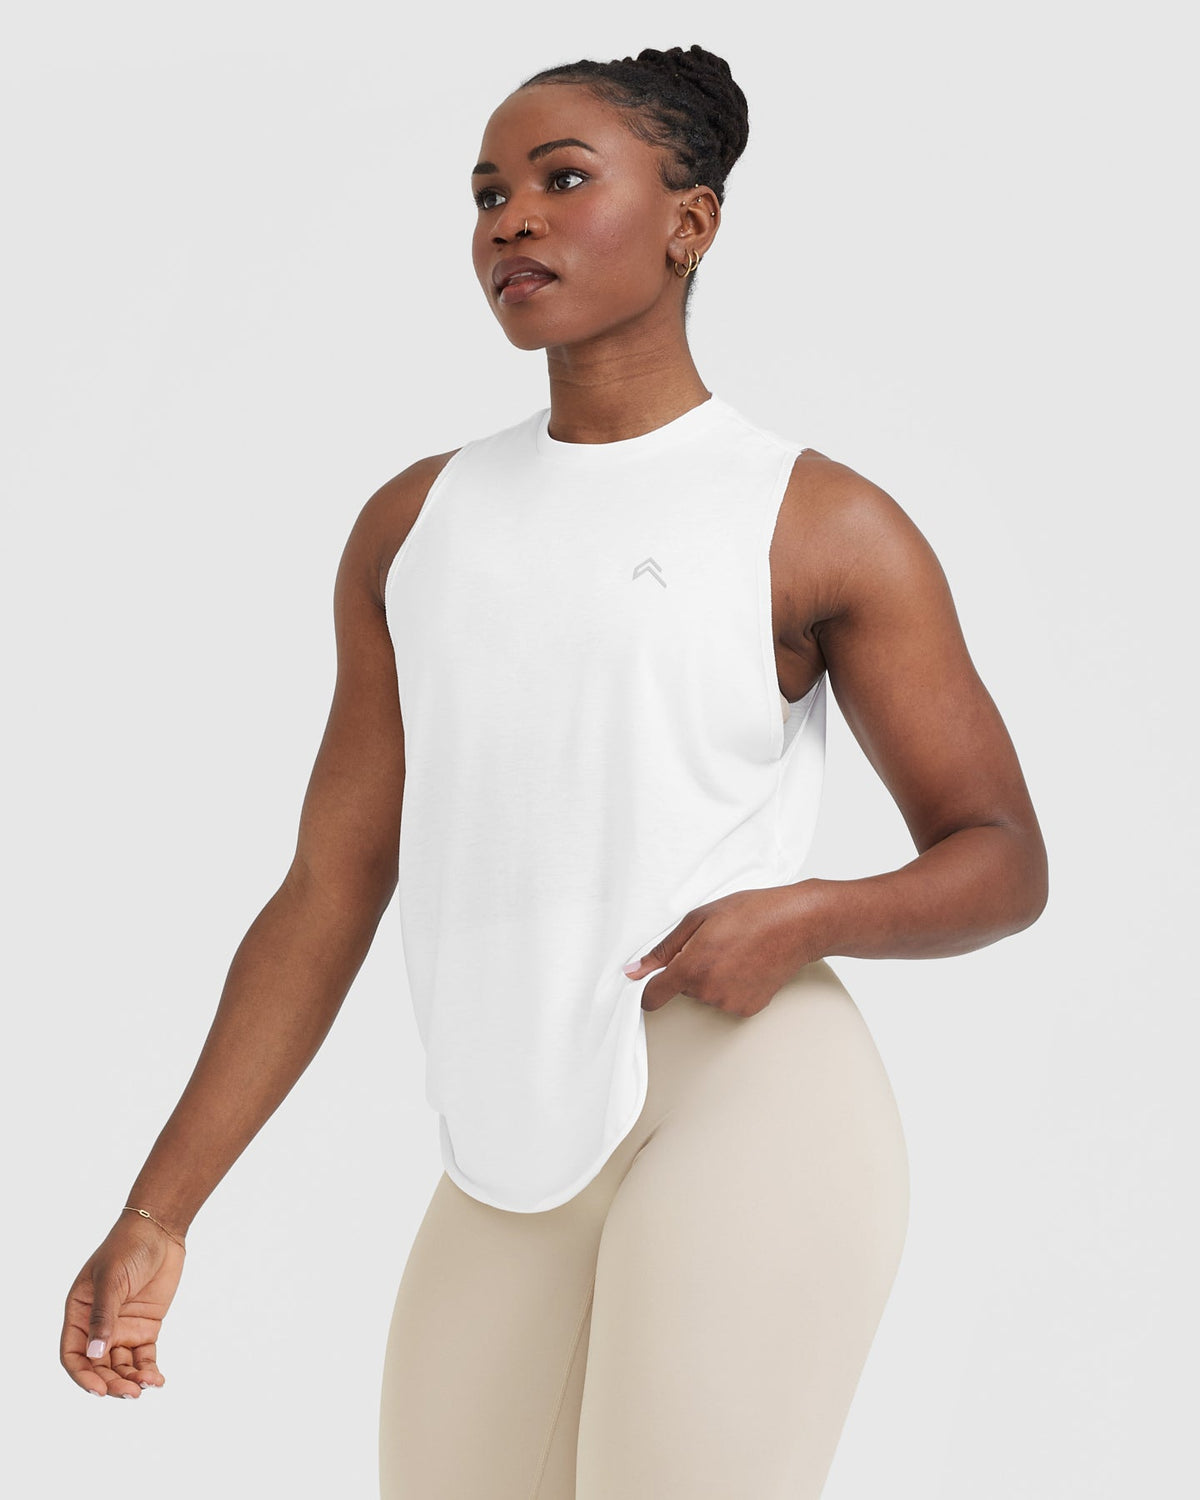 Longer 1/6 scale white leggings and tank top vest with printed